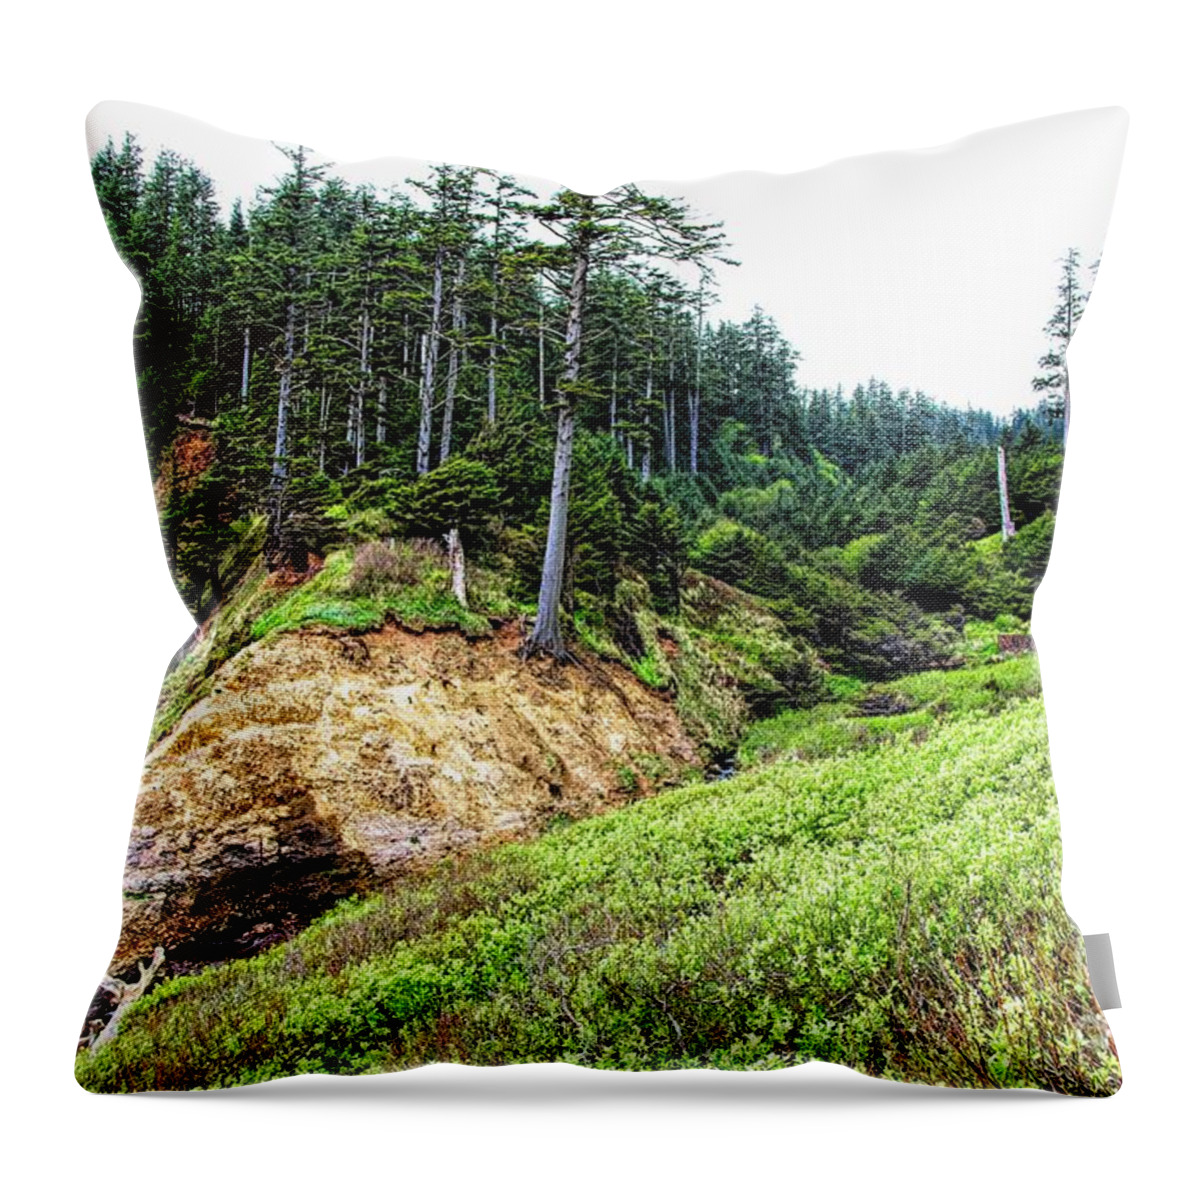 Jon Burch Throw Pillow featuring the photograph Pacific Overlook by Jon Burch Photography